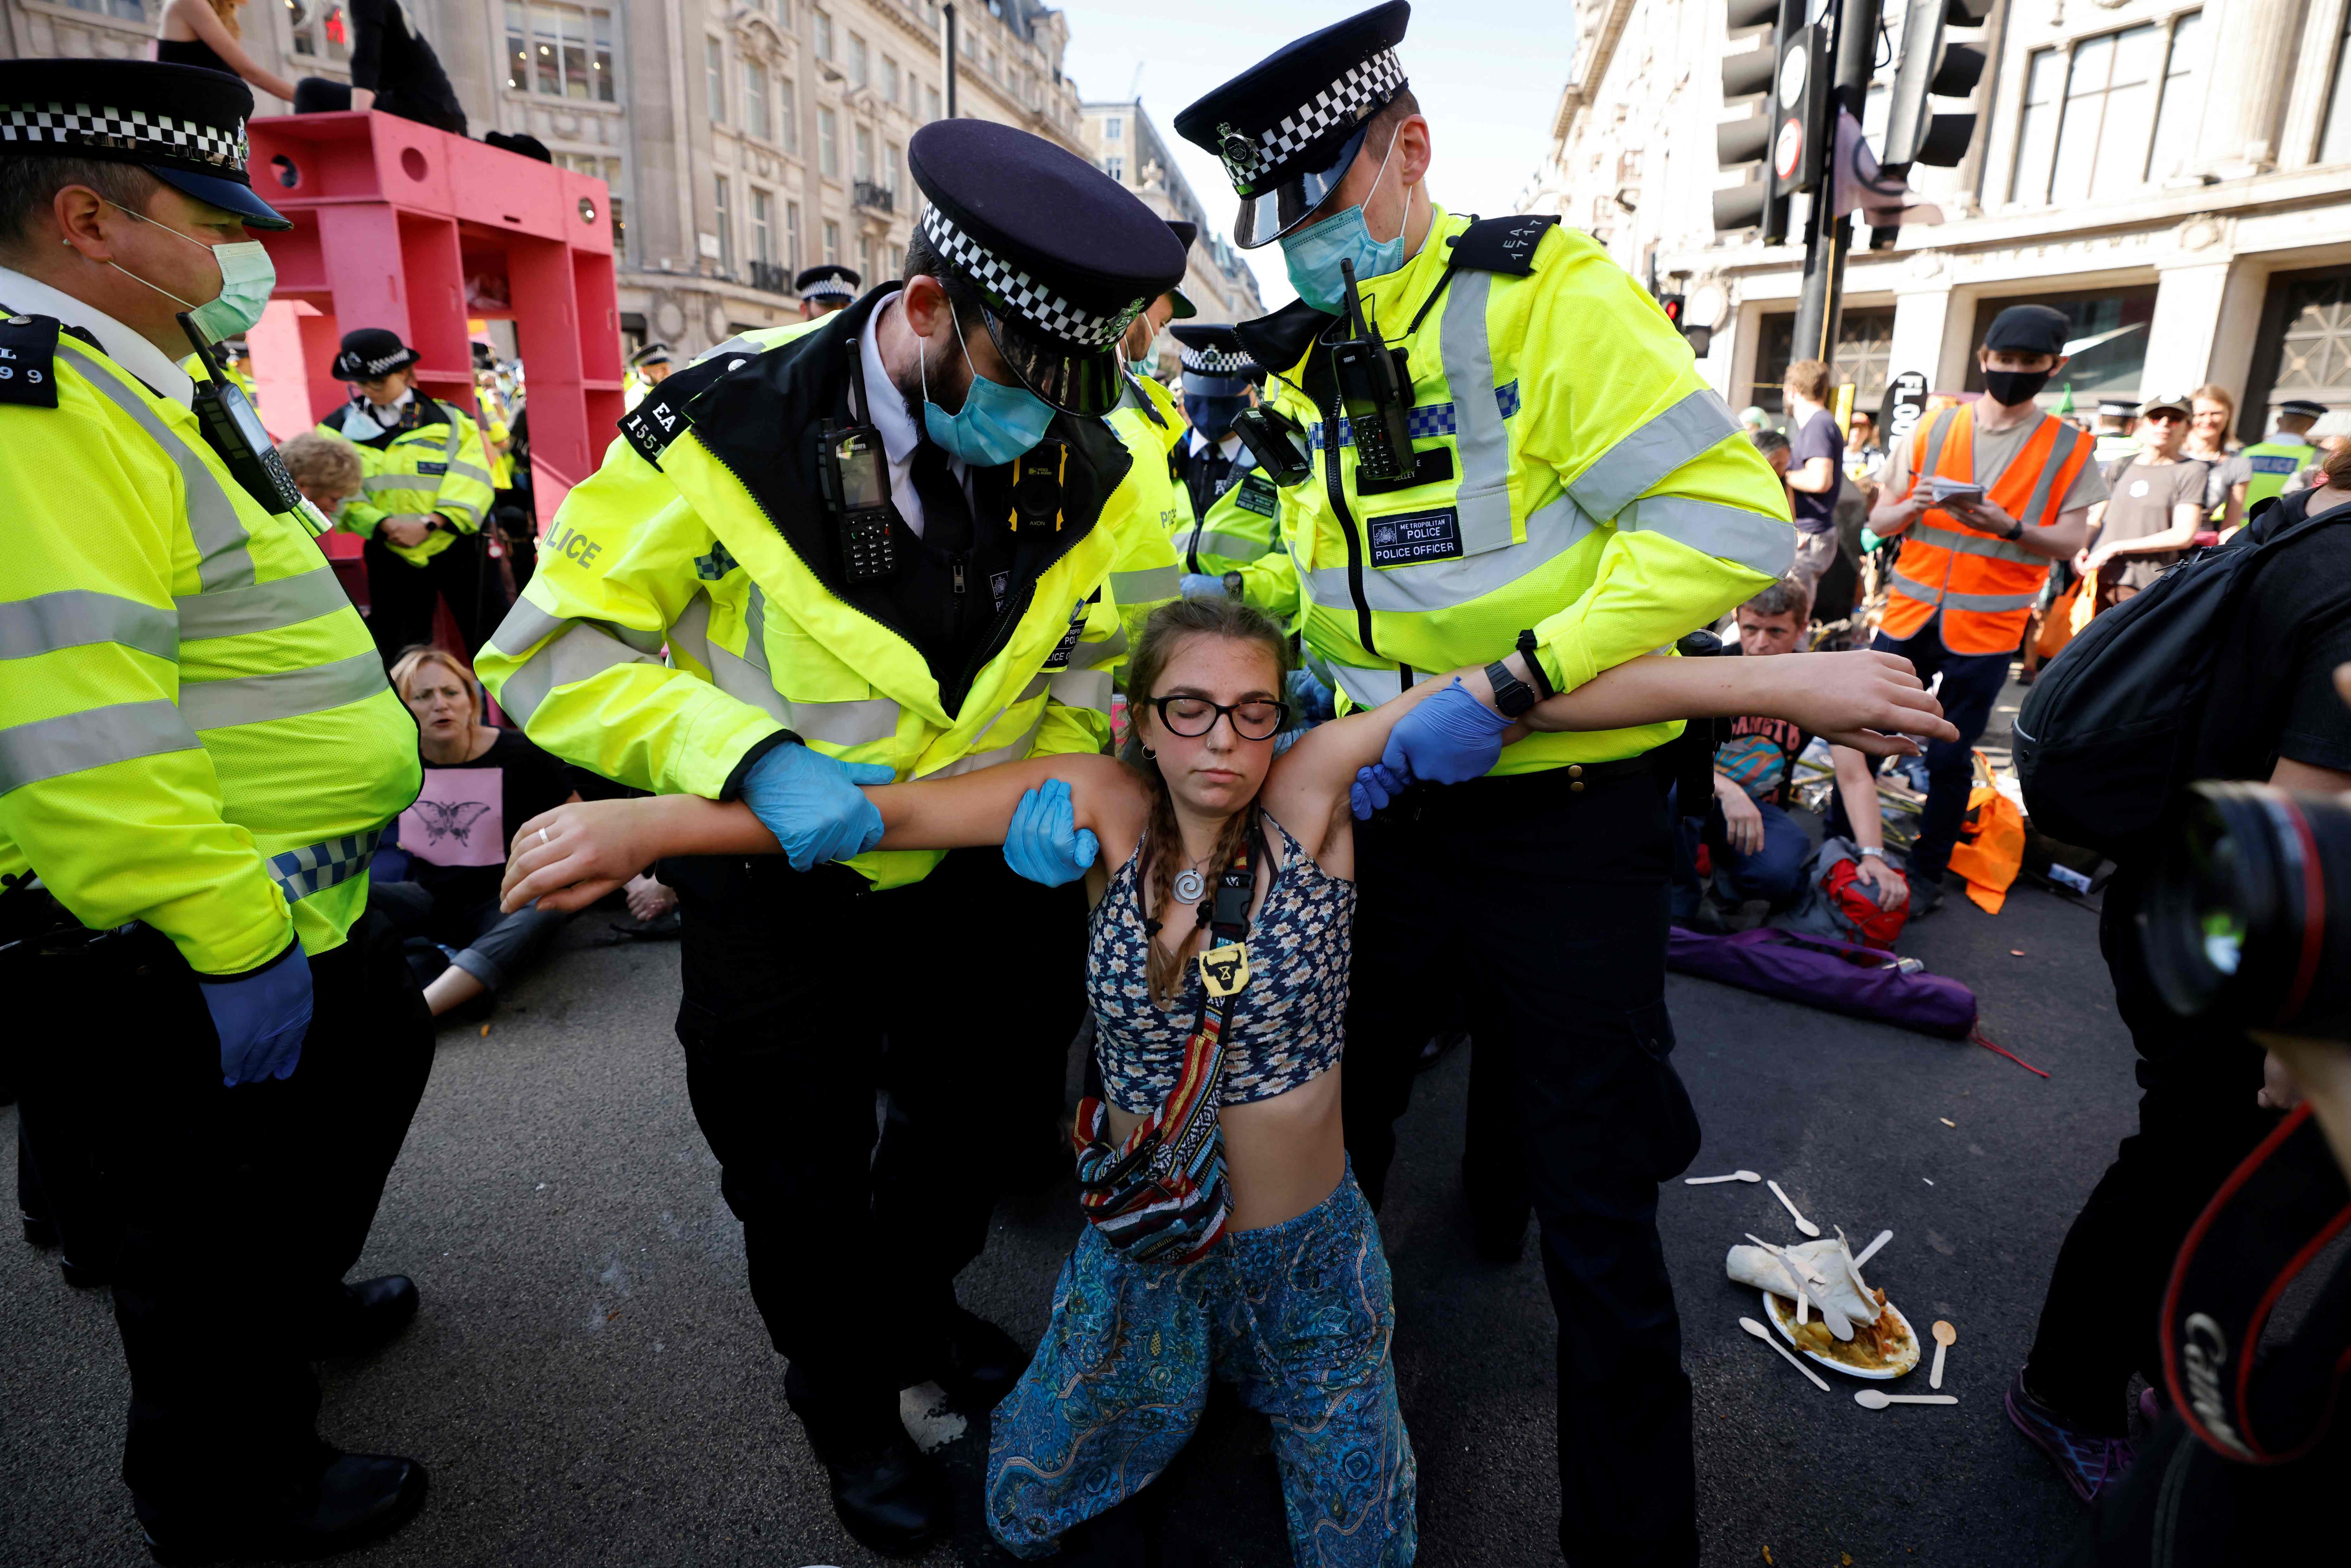 Police officers carry an Extinction Rebellion activist during a series of actions in central London. in August 2021 . The group said it would shift tactics in early 2023